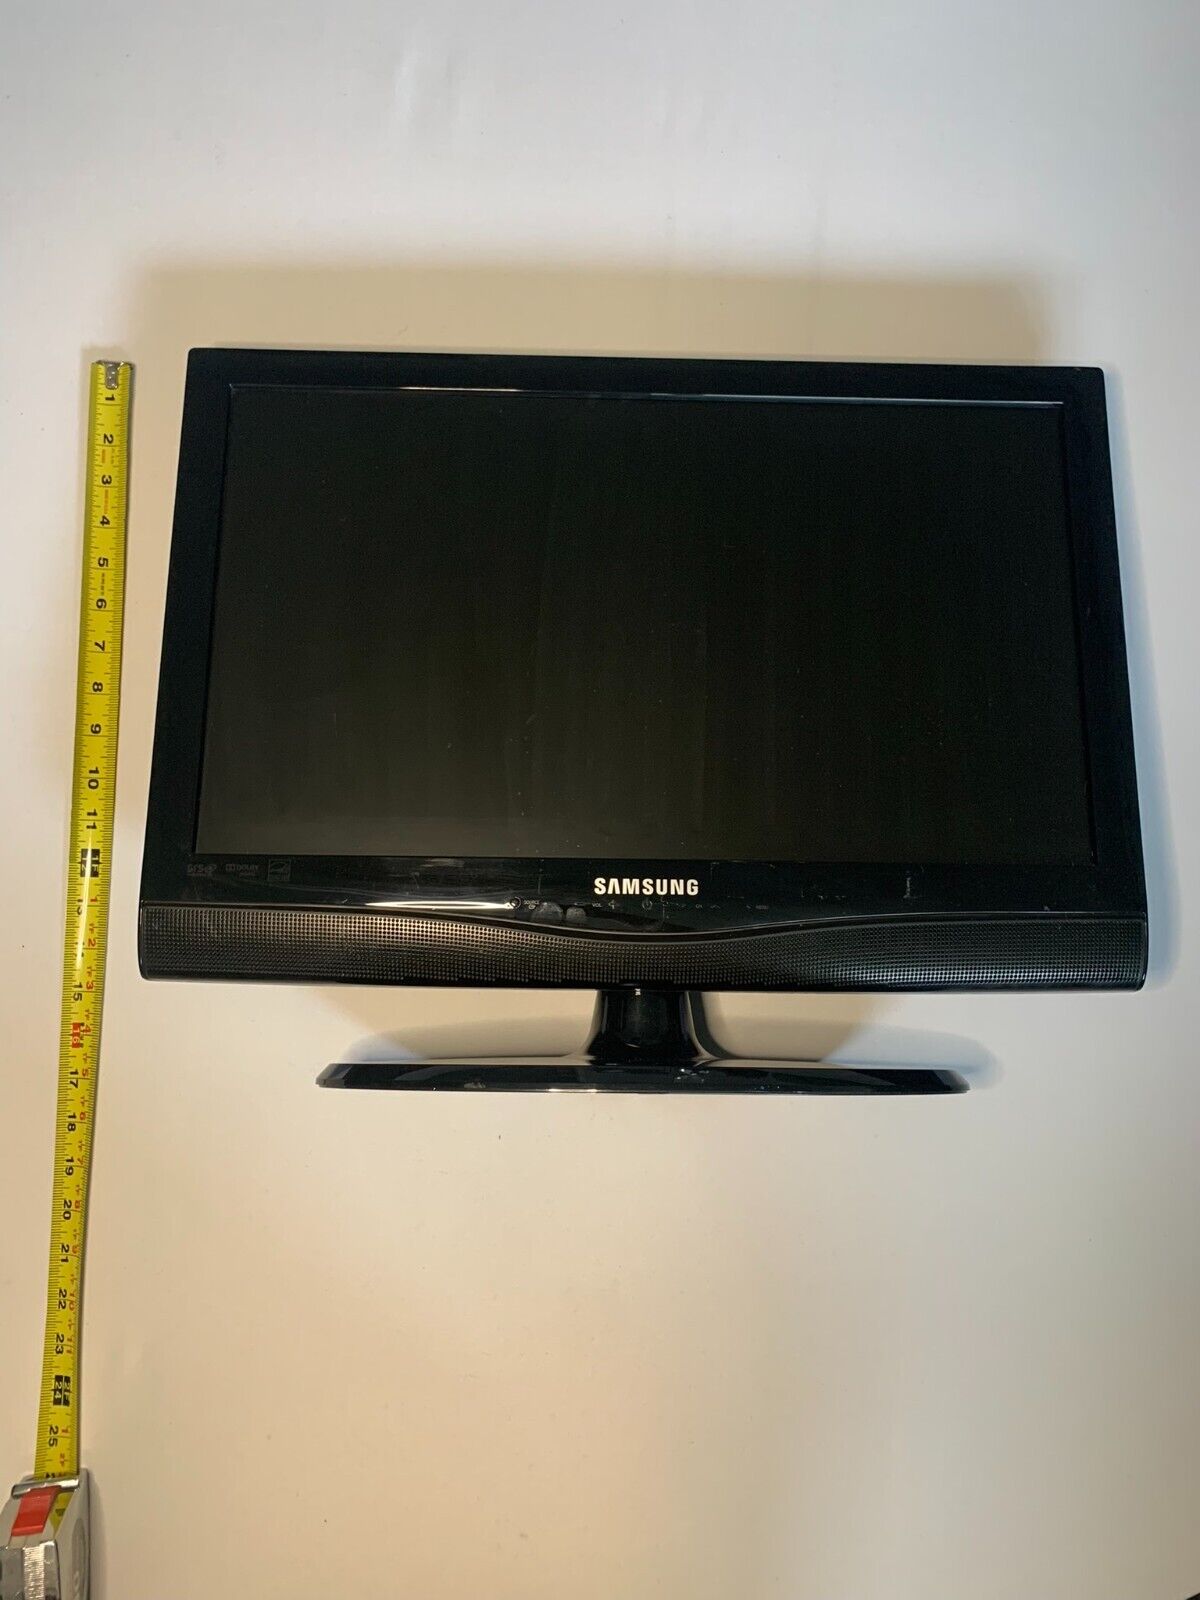 Samsung BN01 21.5-inch Monitor MFD 2010 Black Pre-owned